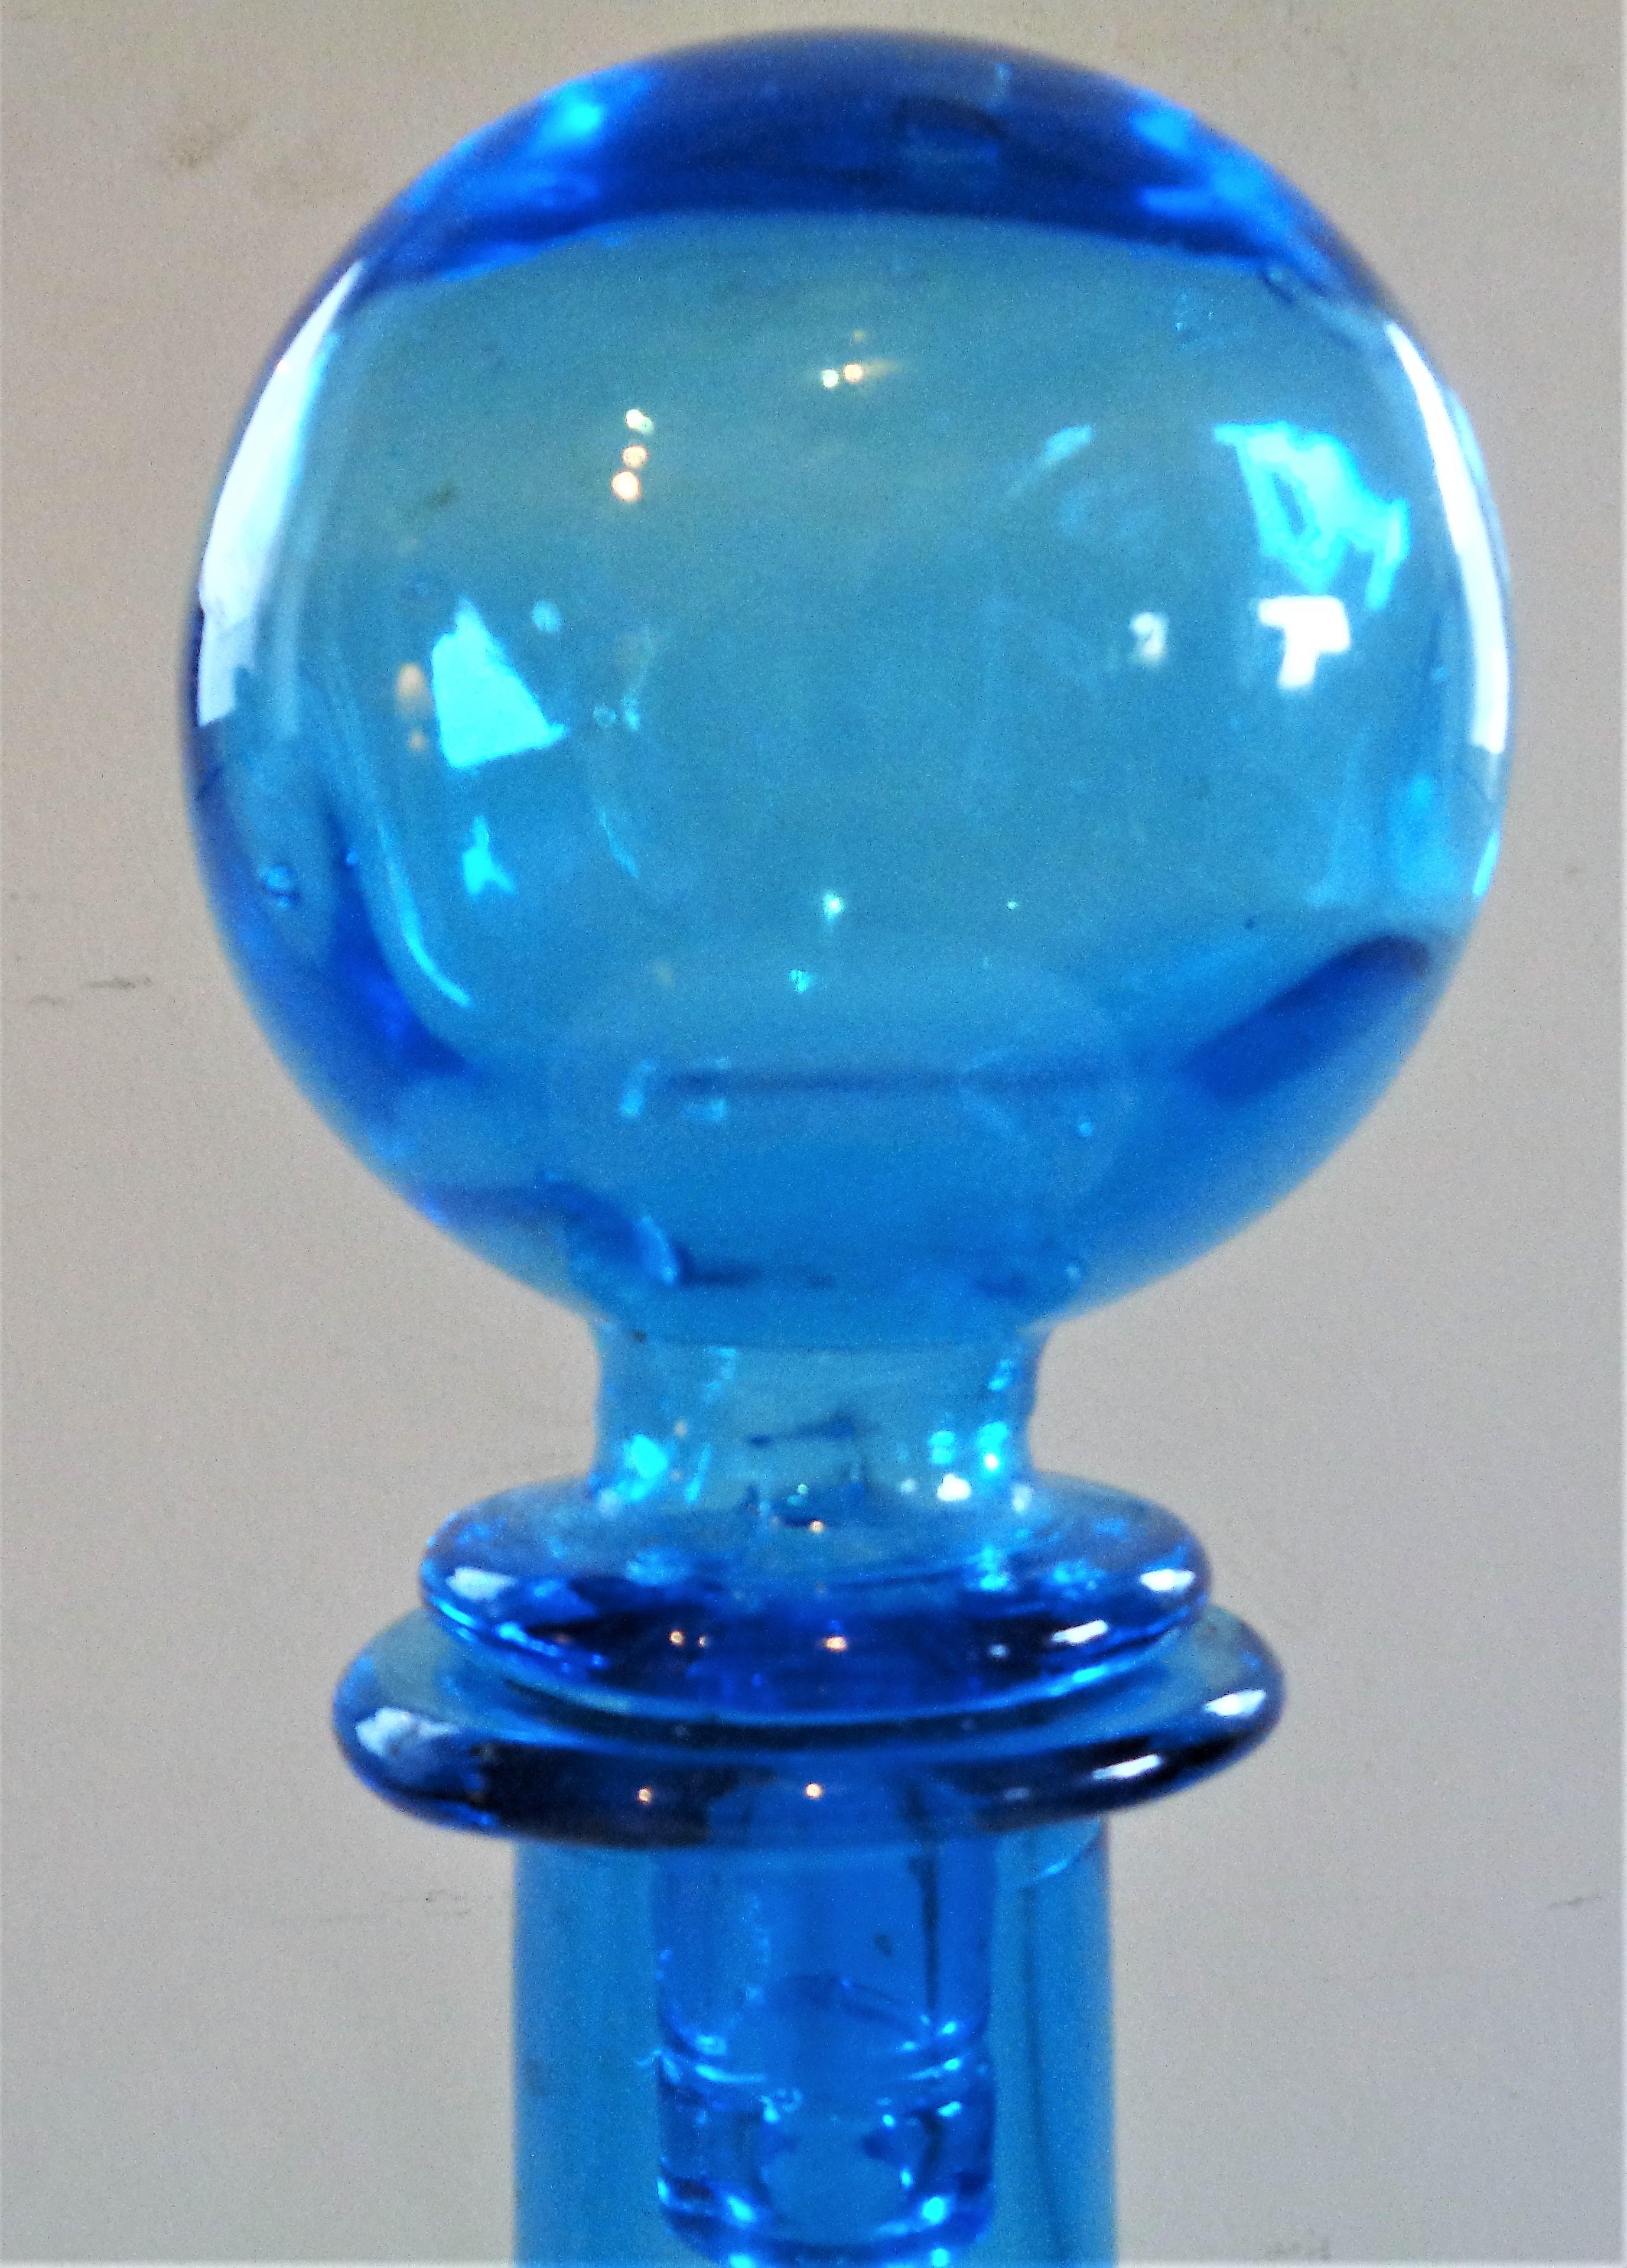 Tall Italian glass bottle with original silver foil label - Guildcraft, Hand Made, Italy. Beautiful blue color w/ large ball stopper and great sculptural form. Circa 1960's. Look at all pictures and read condition report in comment section.